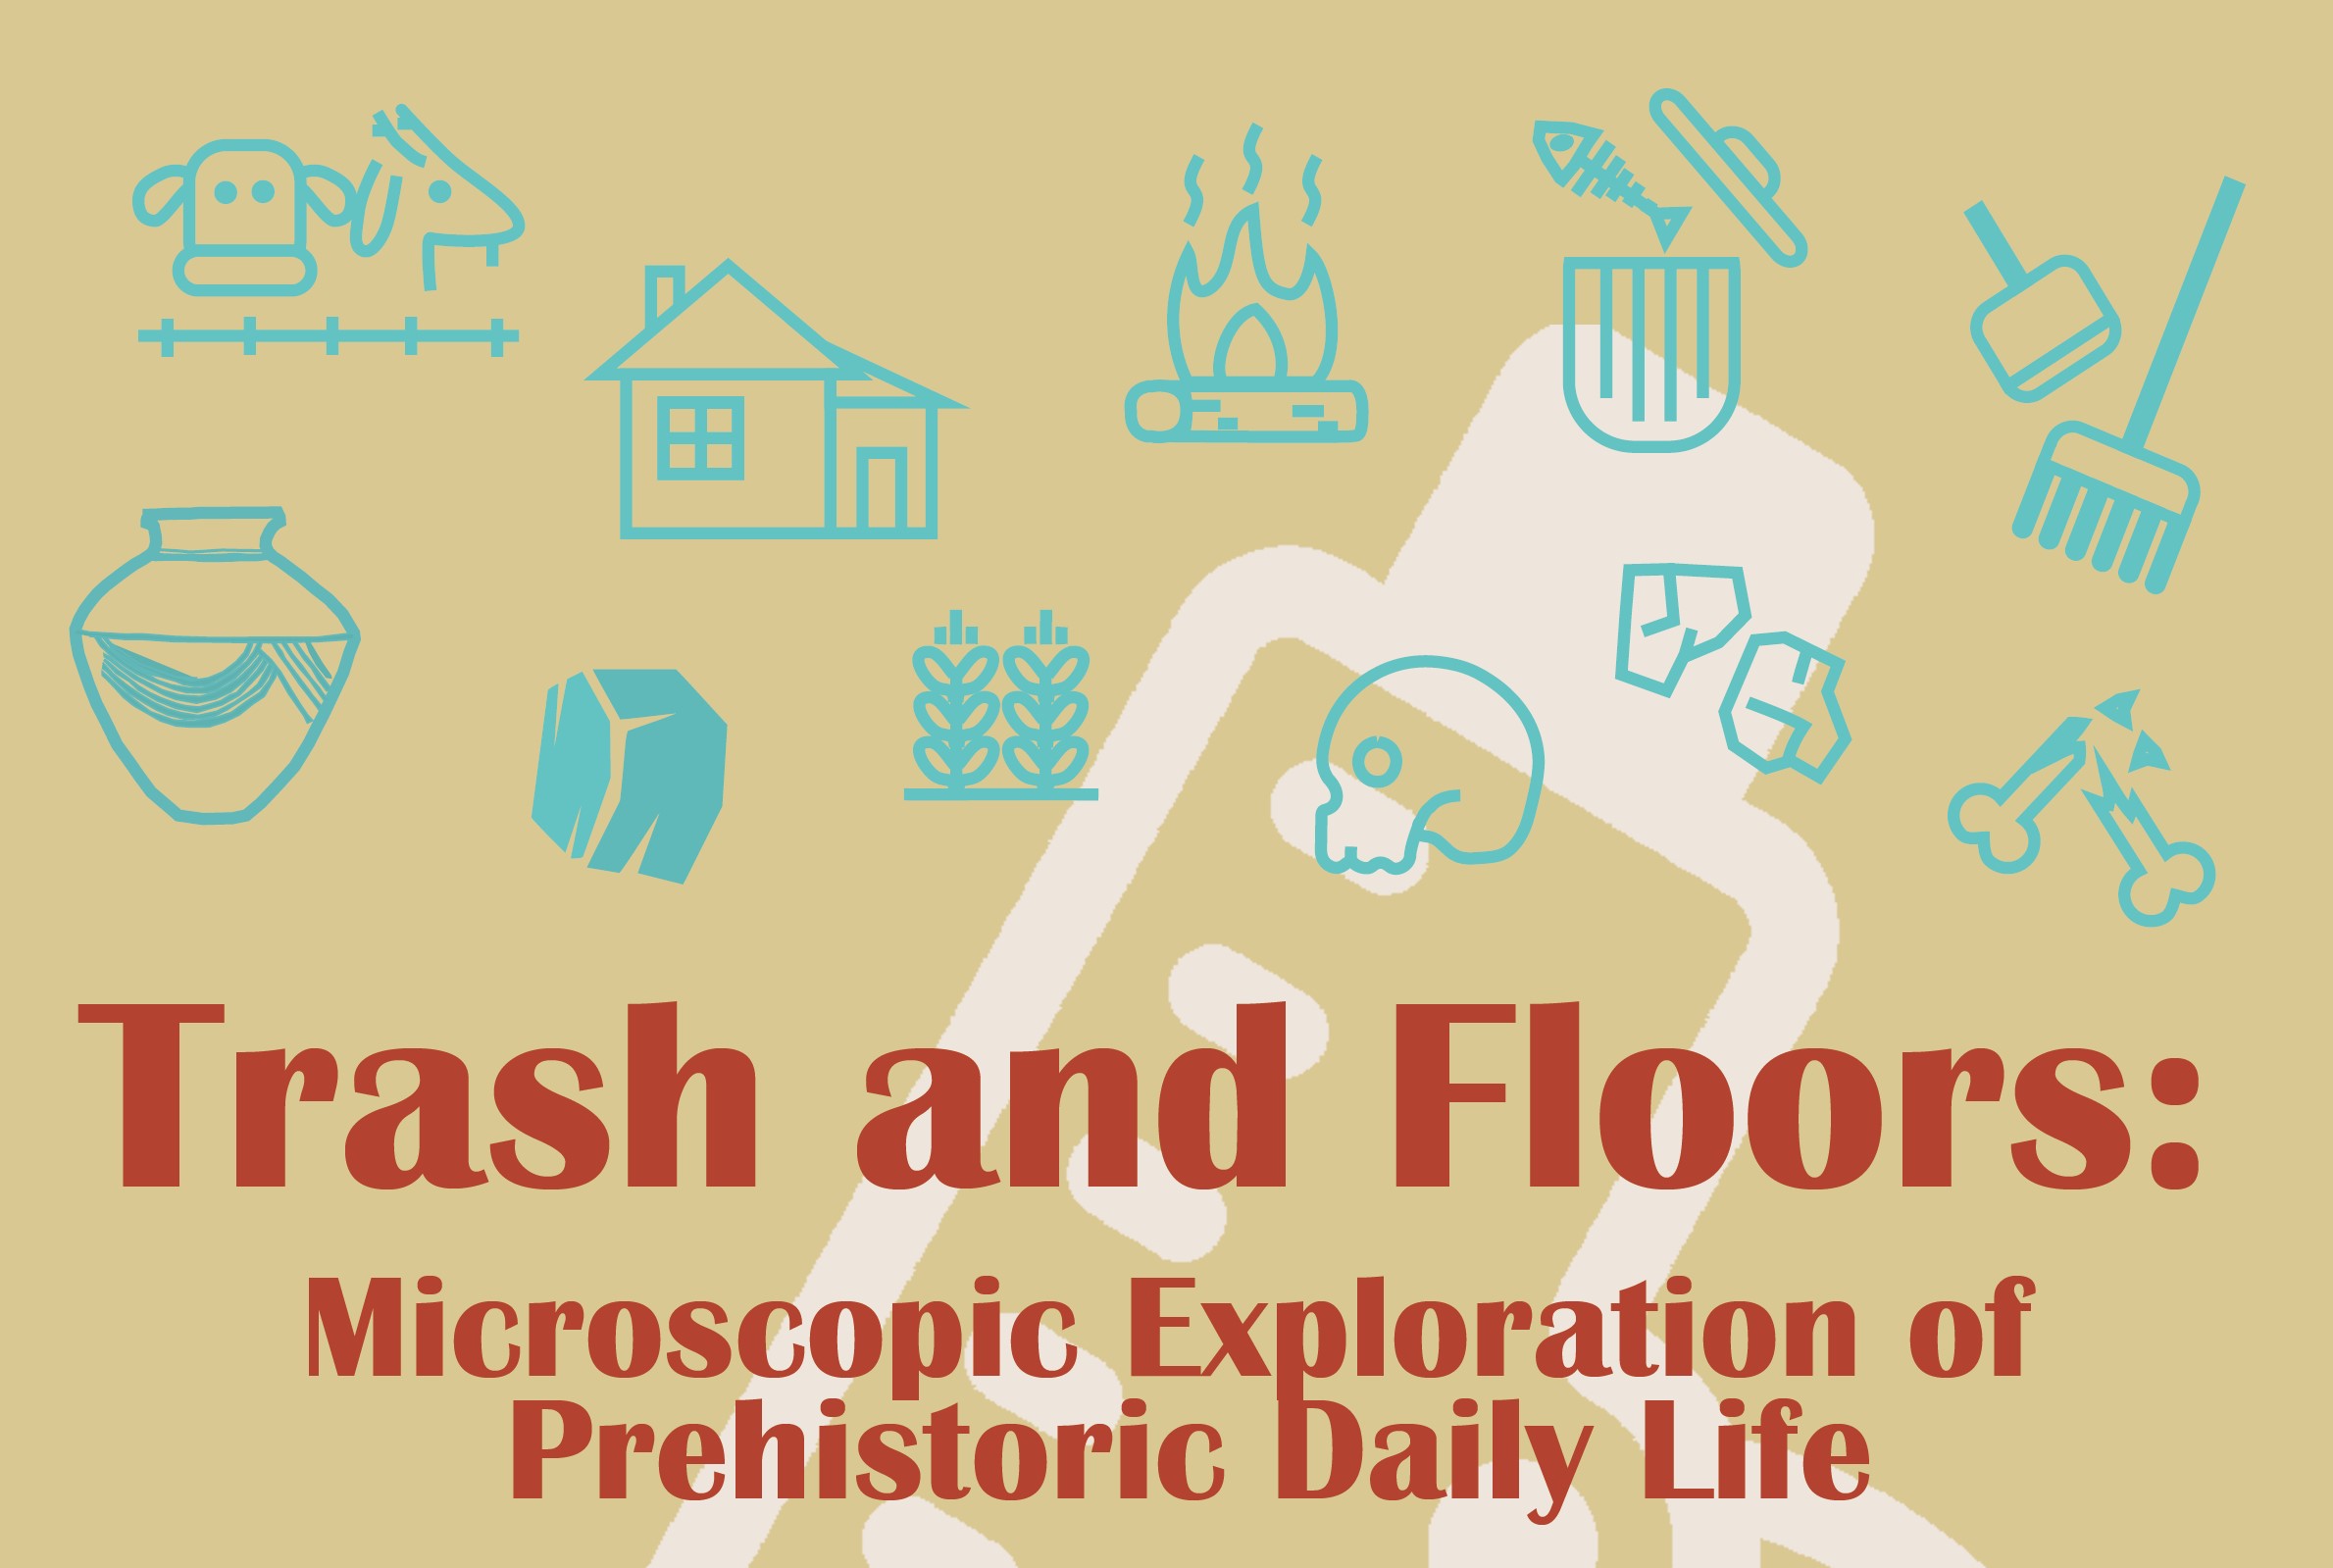 Graphic advertising an event titled Trash and Floors: Microscopic Exploration of Prehistoric Daly Life. Above the title are various stylised illustrations of domesticated farm animals, a house, skull, fire, fish skeleton, broken bone, broom and dustpan, grasses and a ceramic vessel.